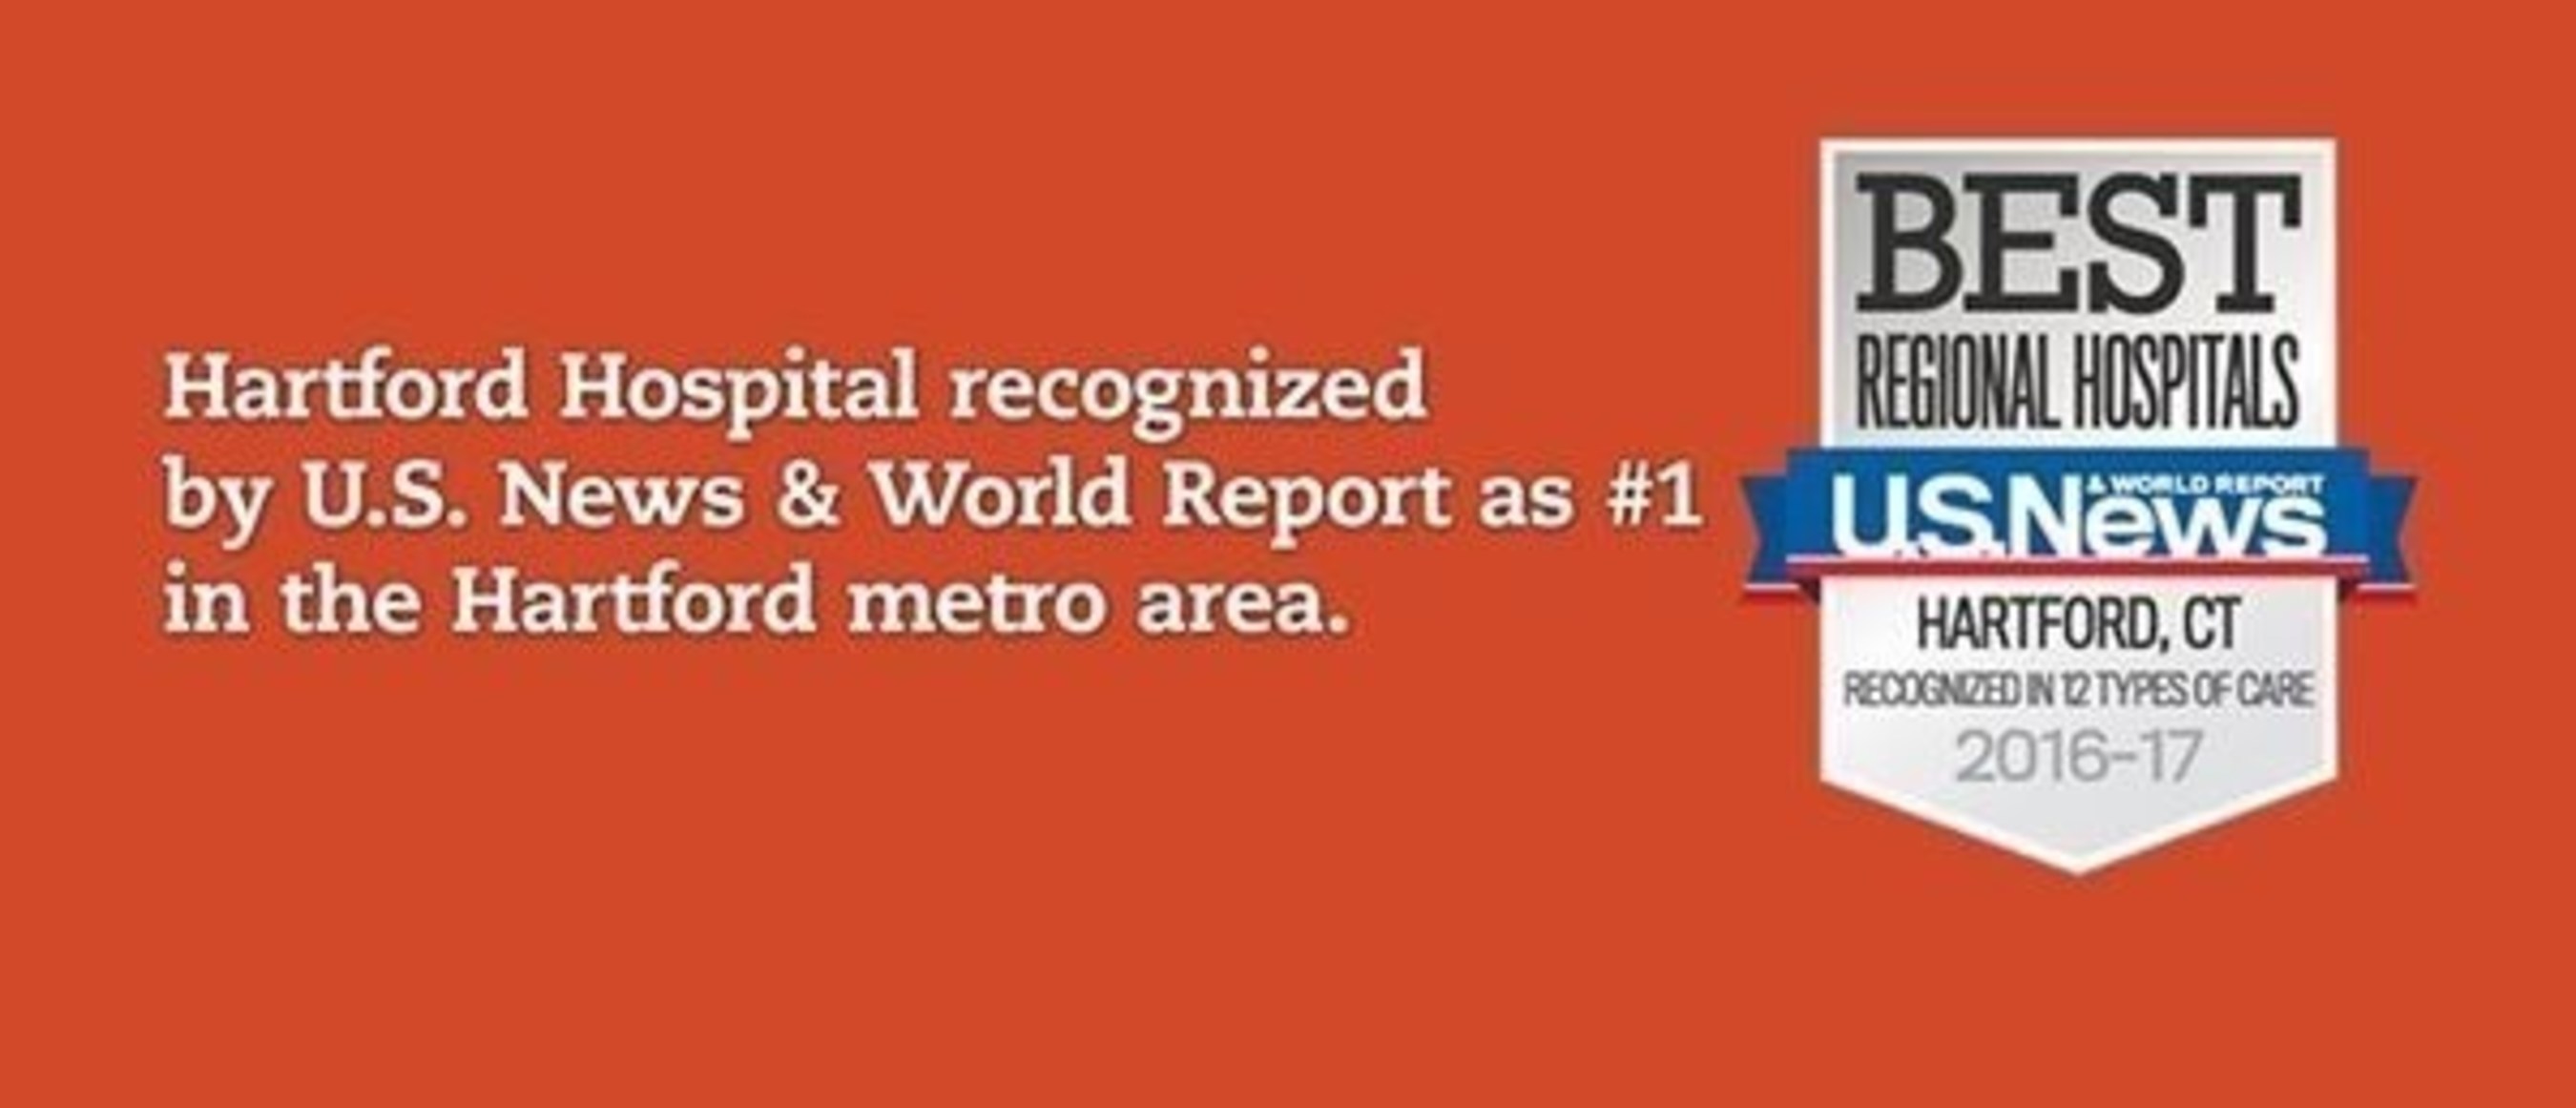 Hartford Hospital is named number 1 in the Hartford region by US News & World Report